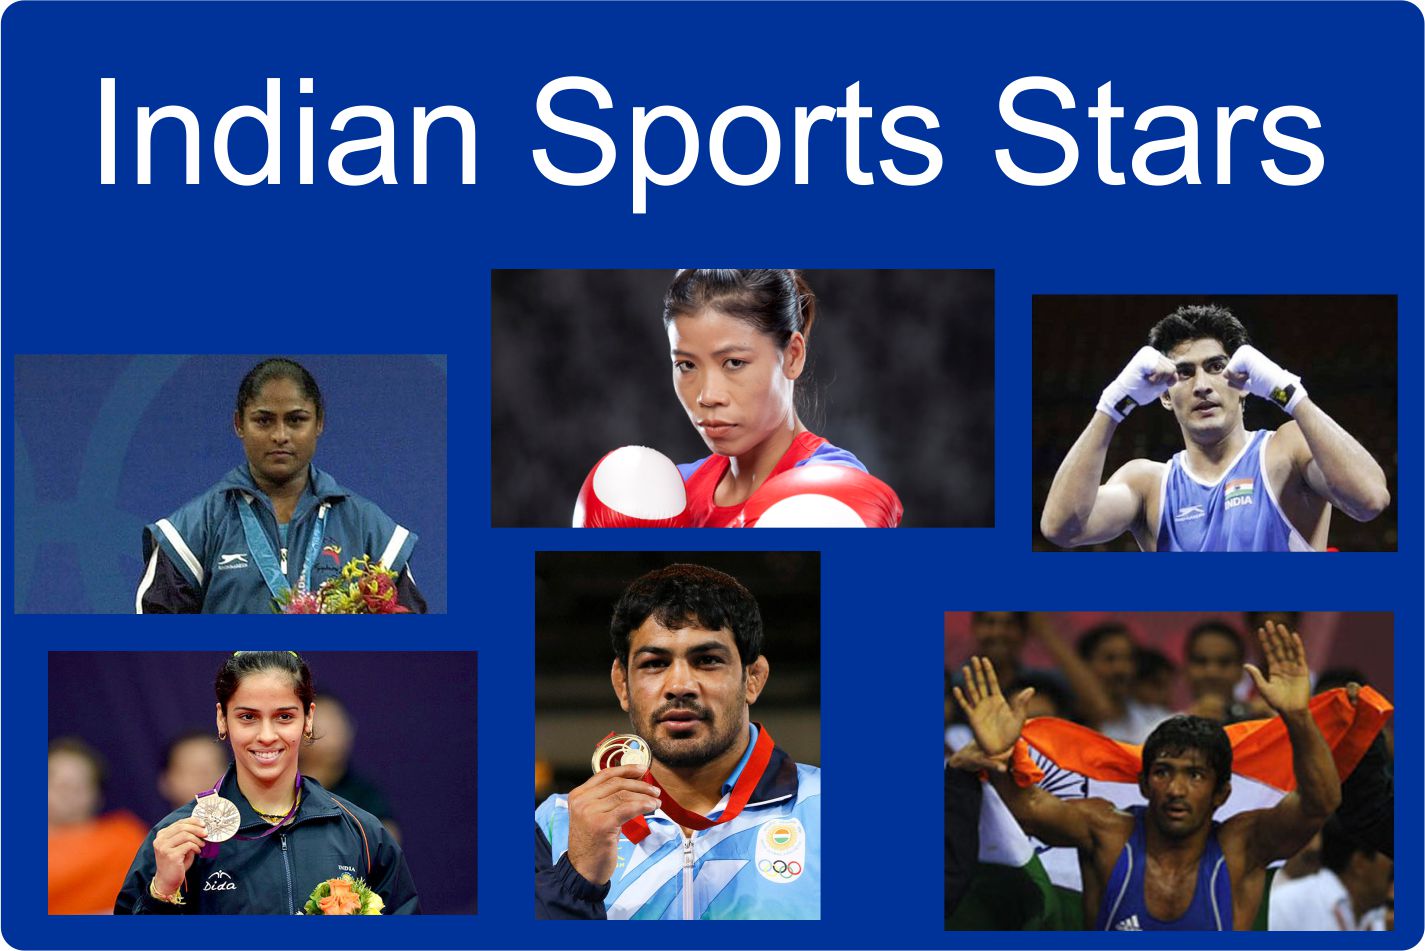 Indian sports